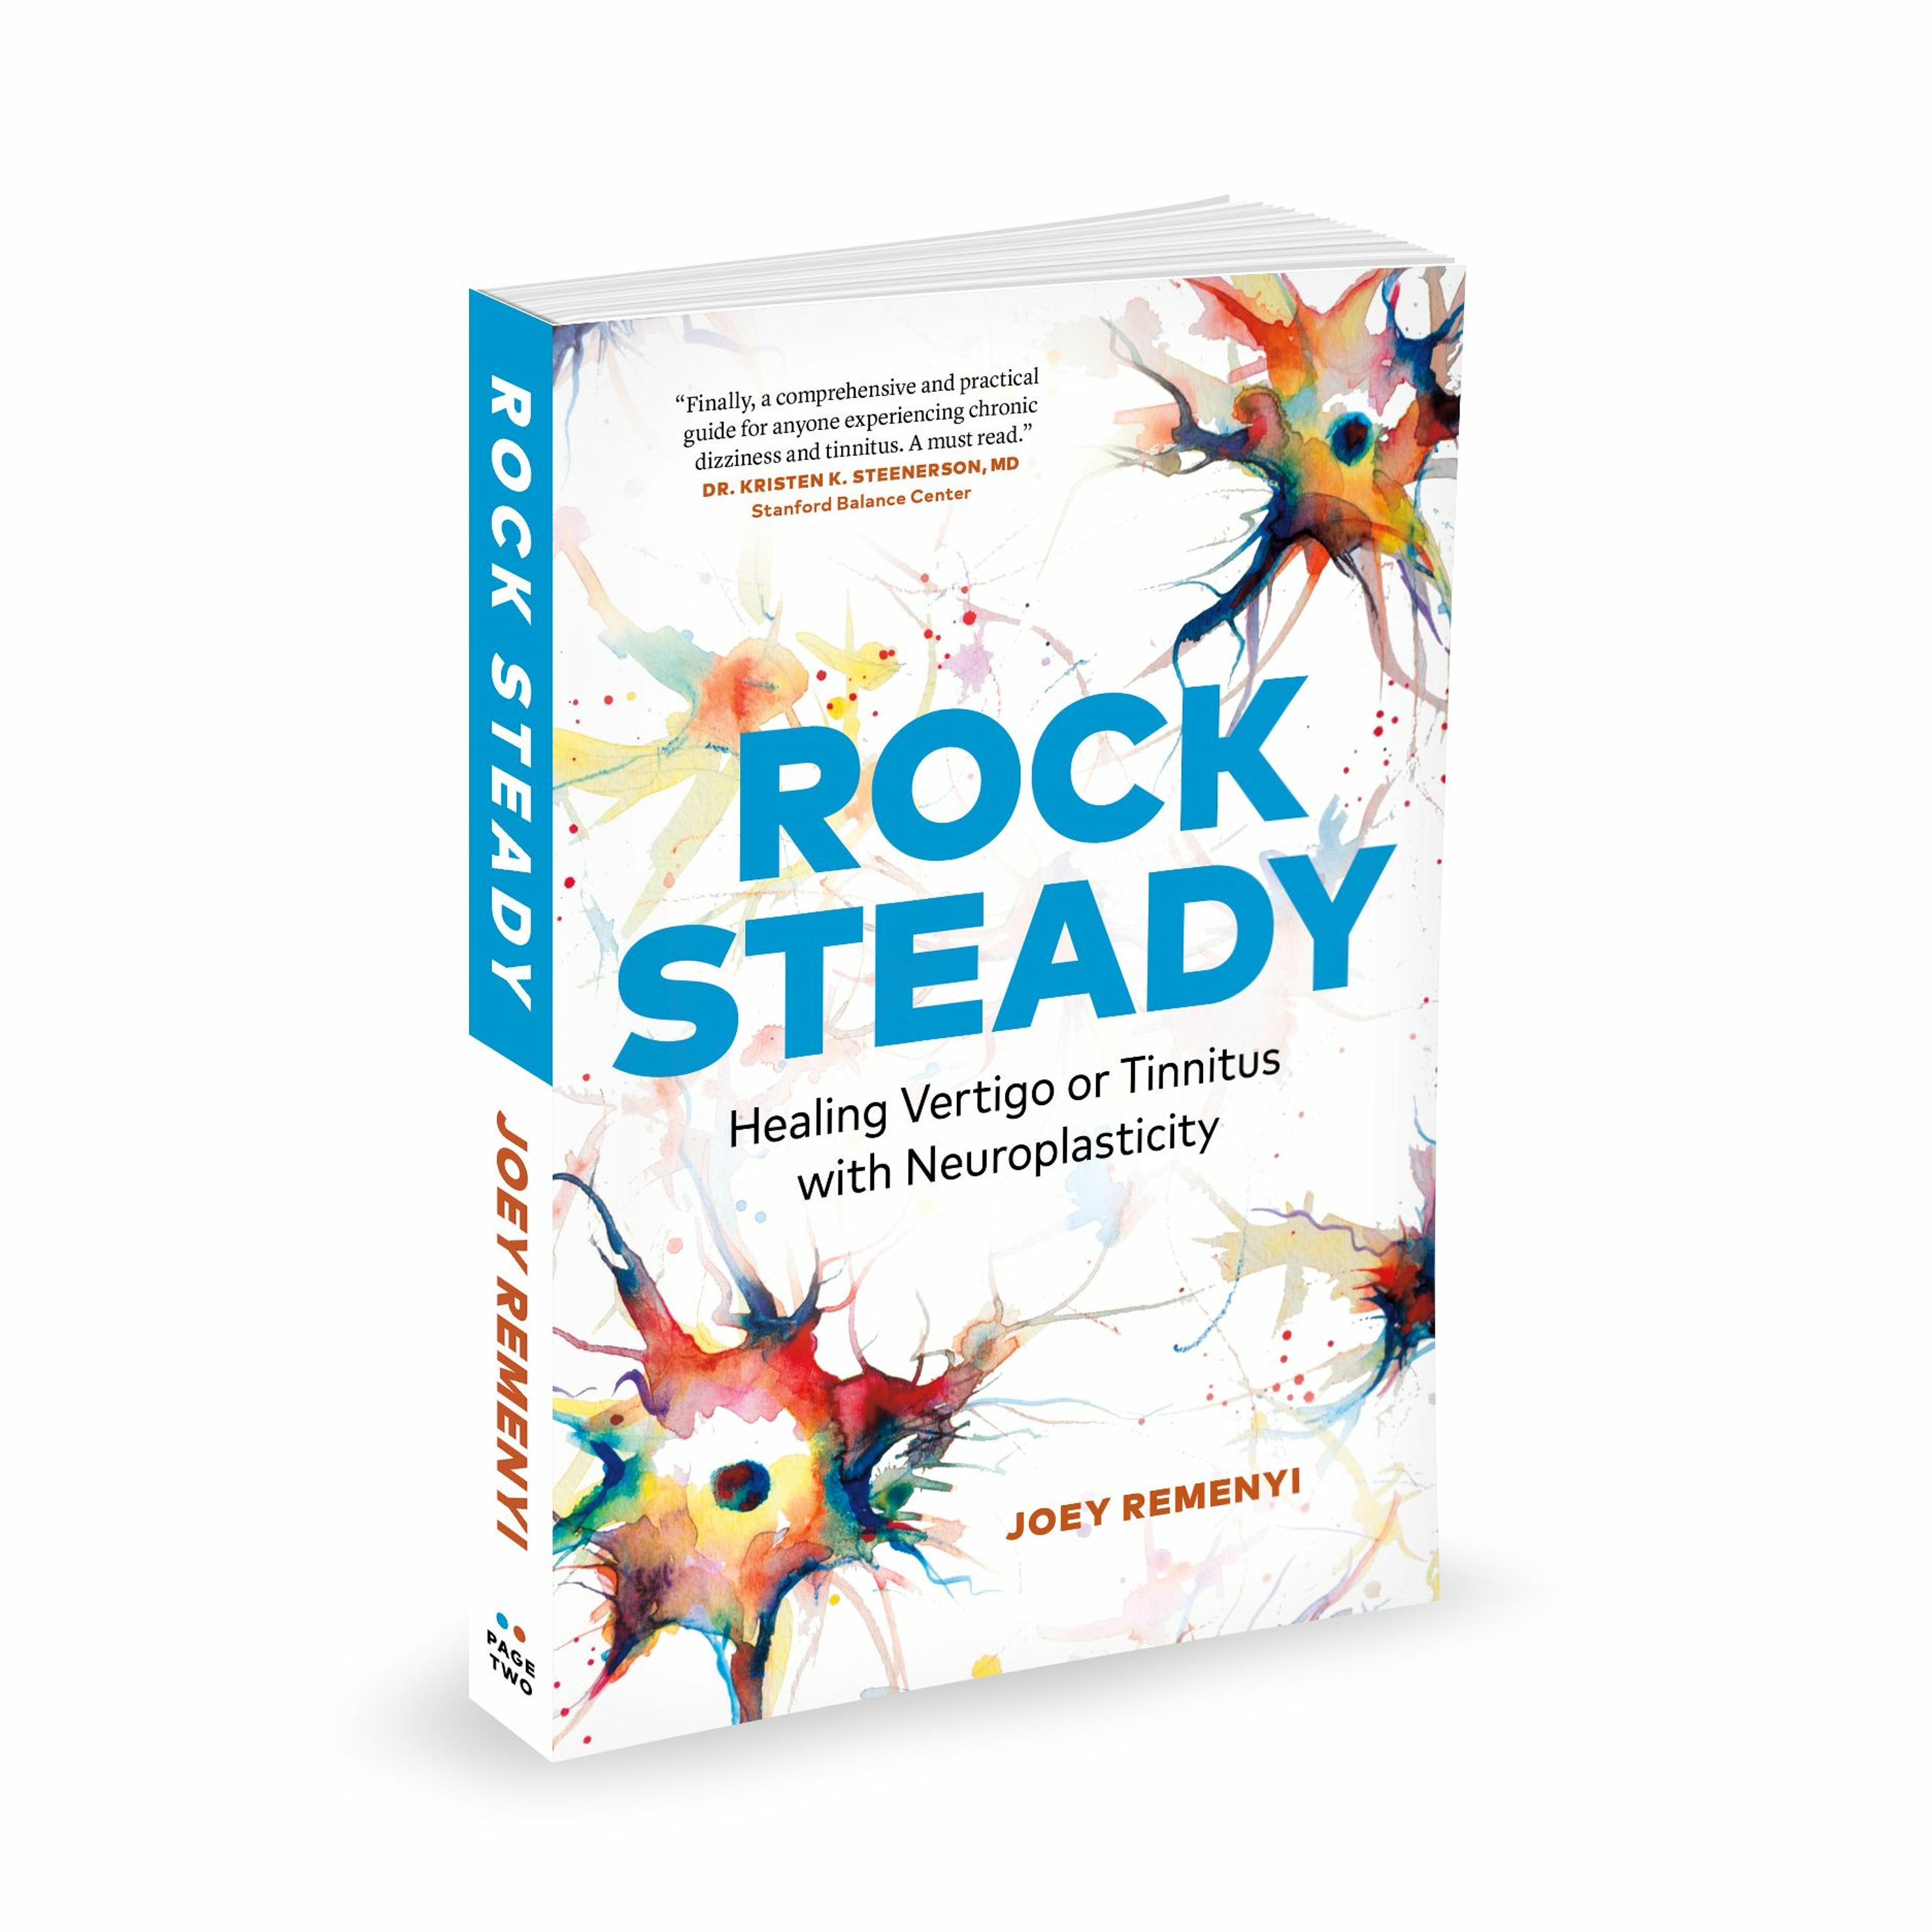 Margie Shares How Rock Steady Changed Her Life